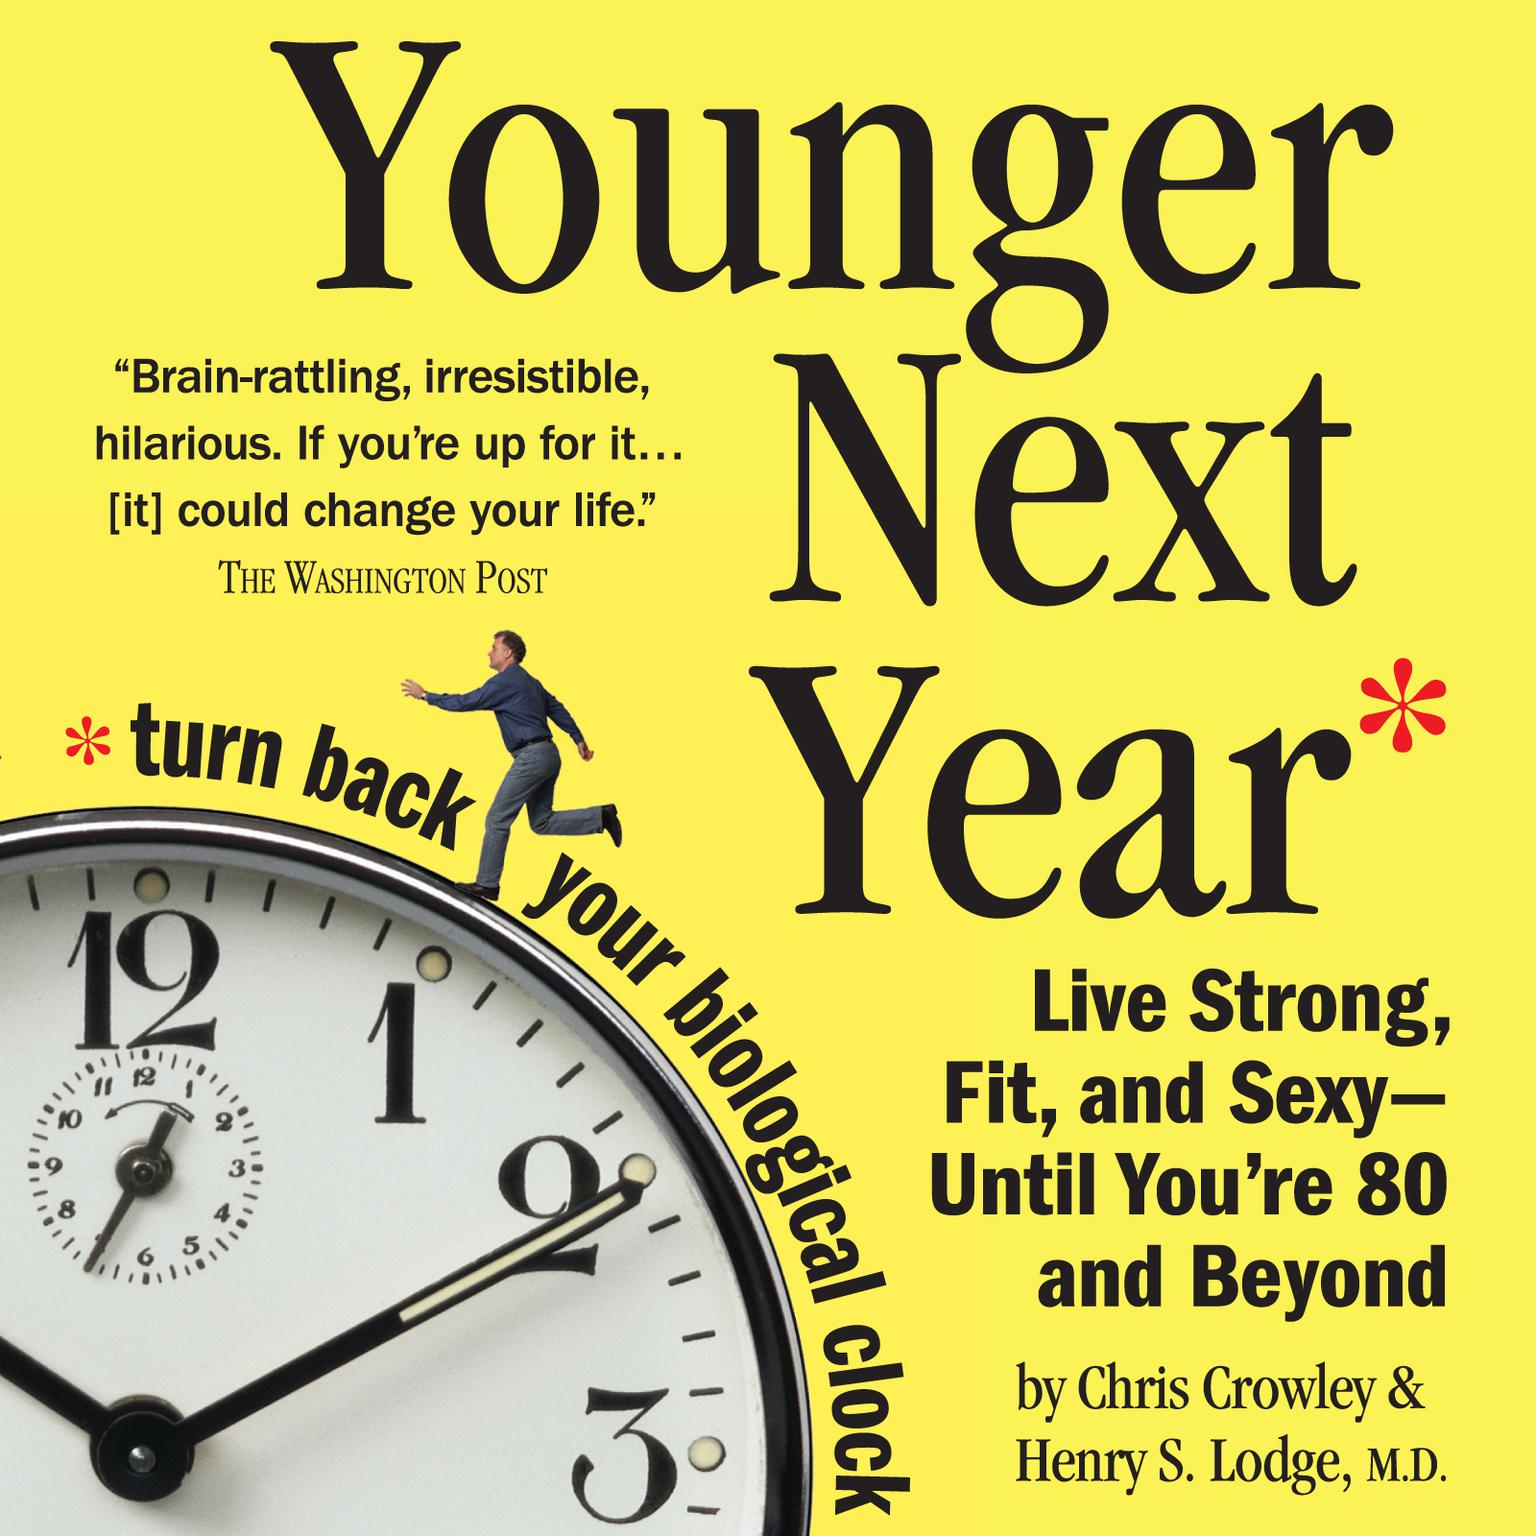 Younger Next Year (Abridged): Live Strong, Fit, and Sexy - Until Youre 80 and Beyond Audiobook, by Chris Crowley